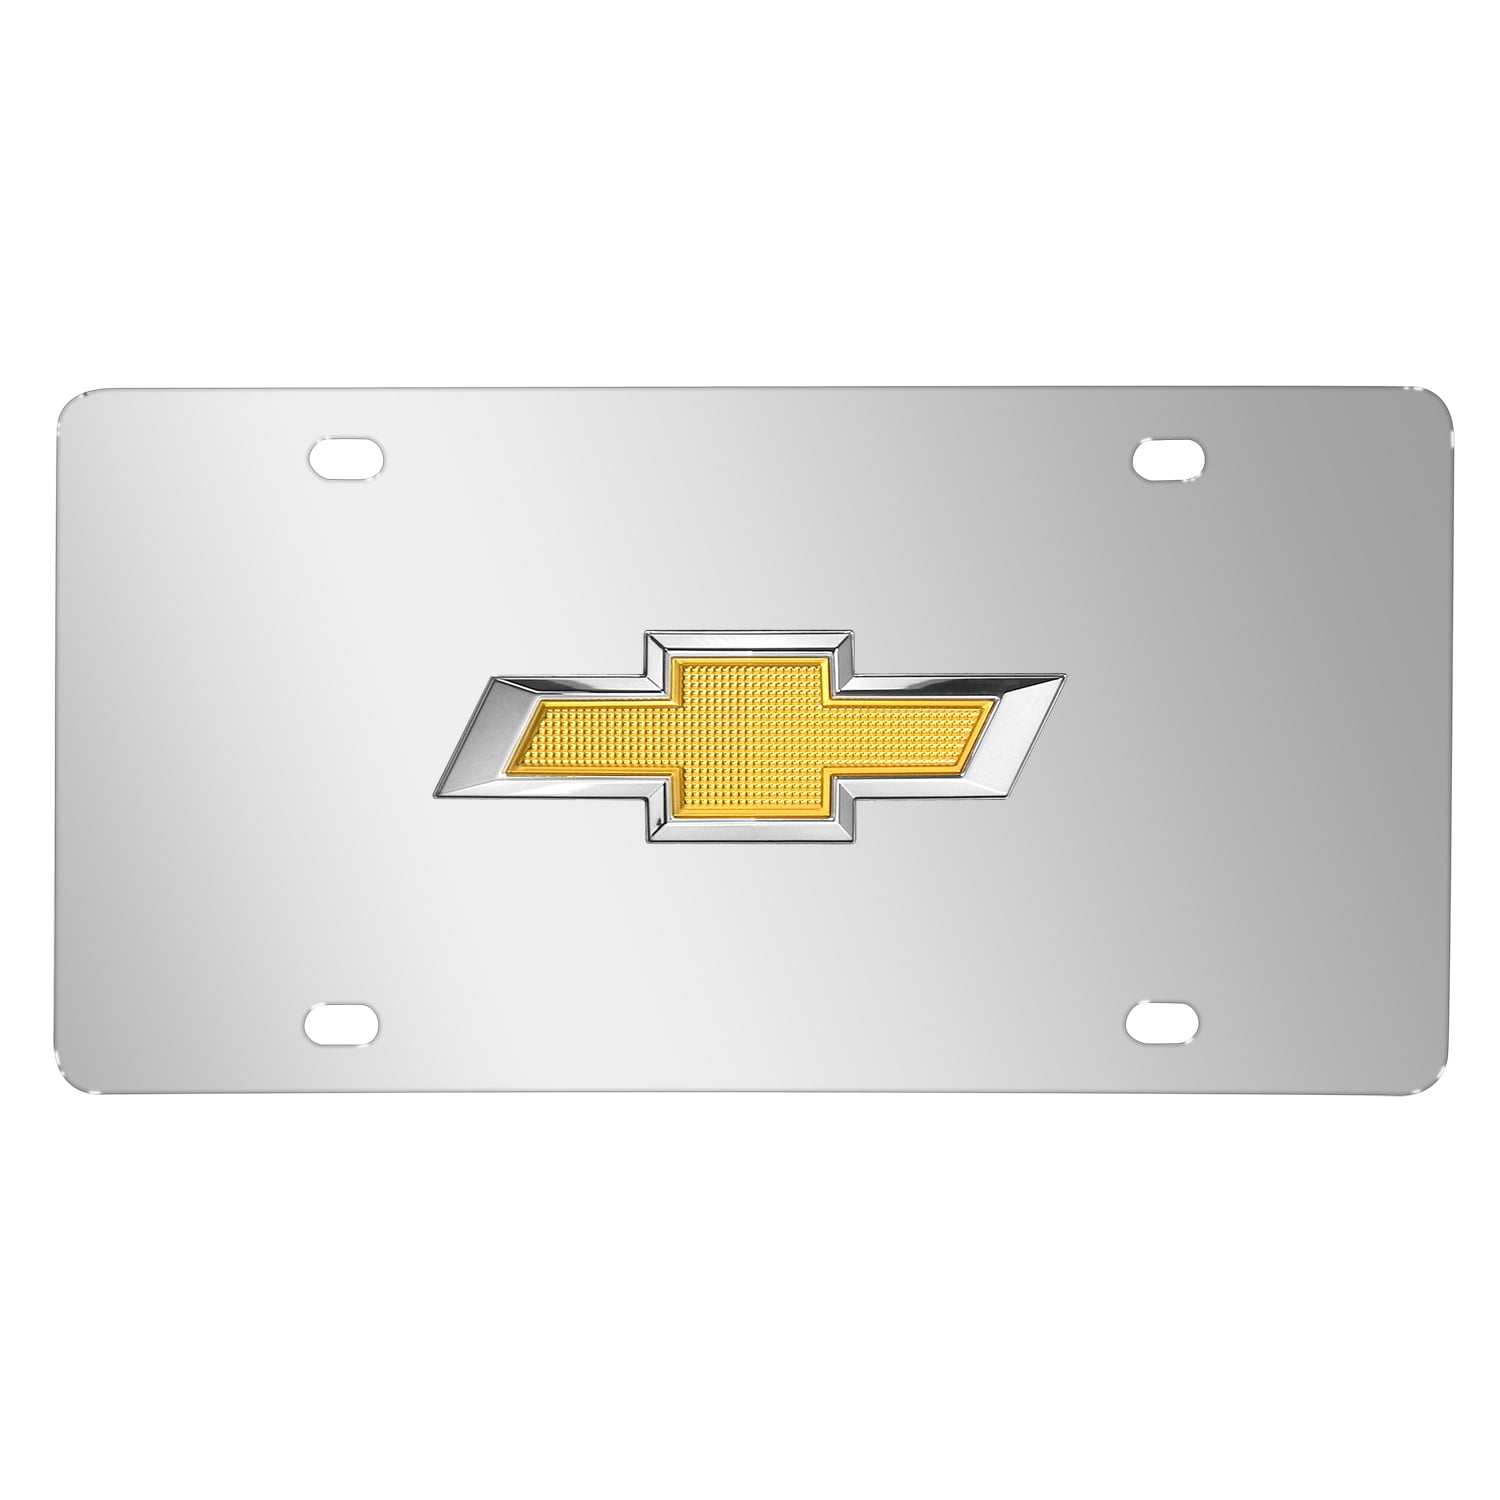 INC Acura 3D Logo and Nameplate Chrome Stainless Steel License Plate,12x6 Au-Tomotive Gold